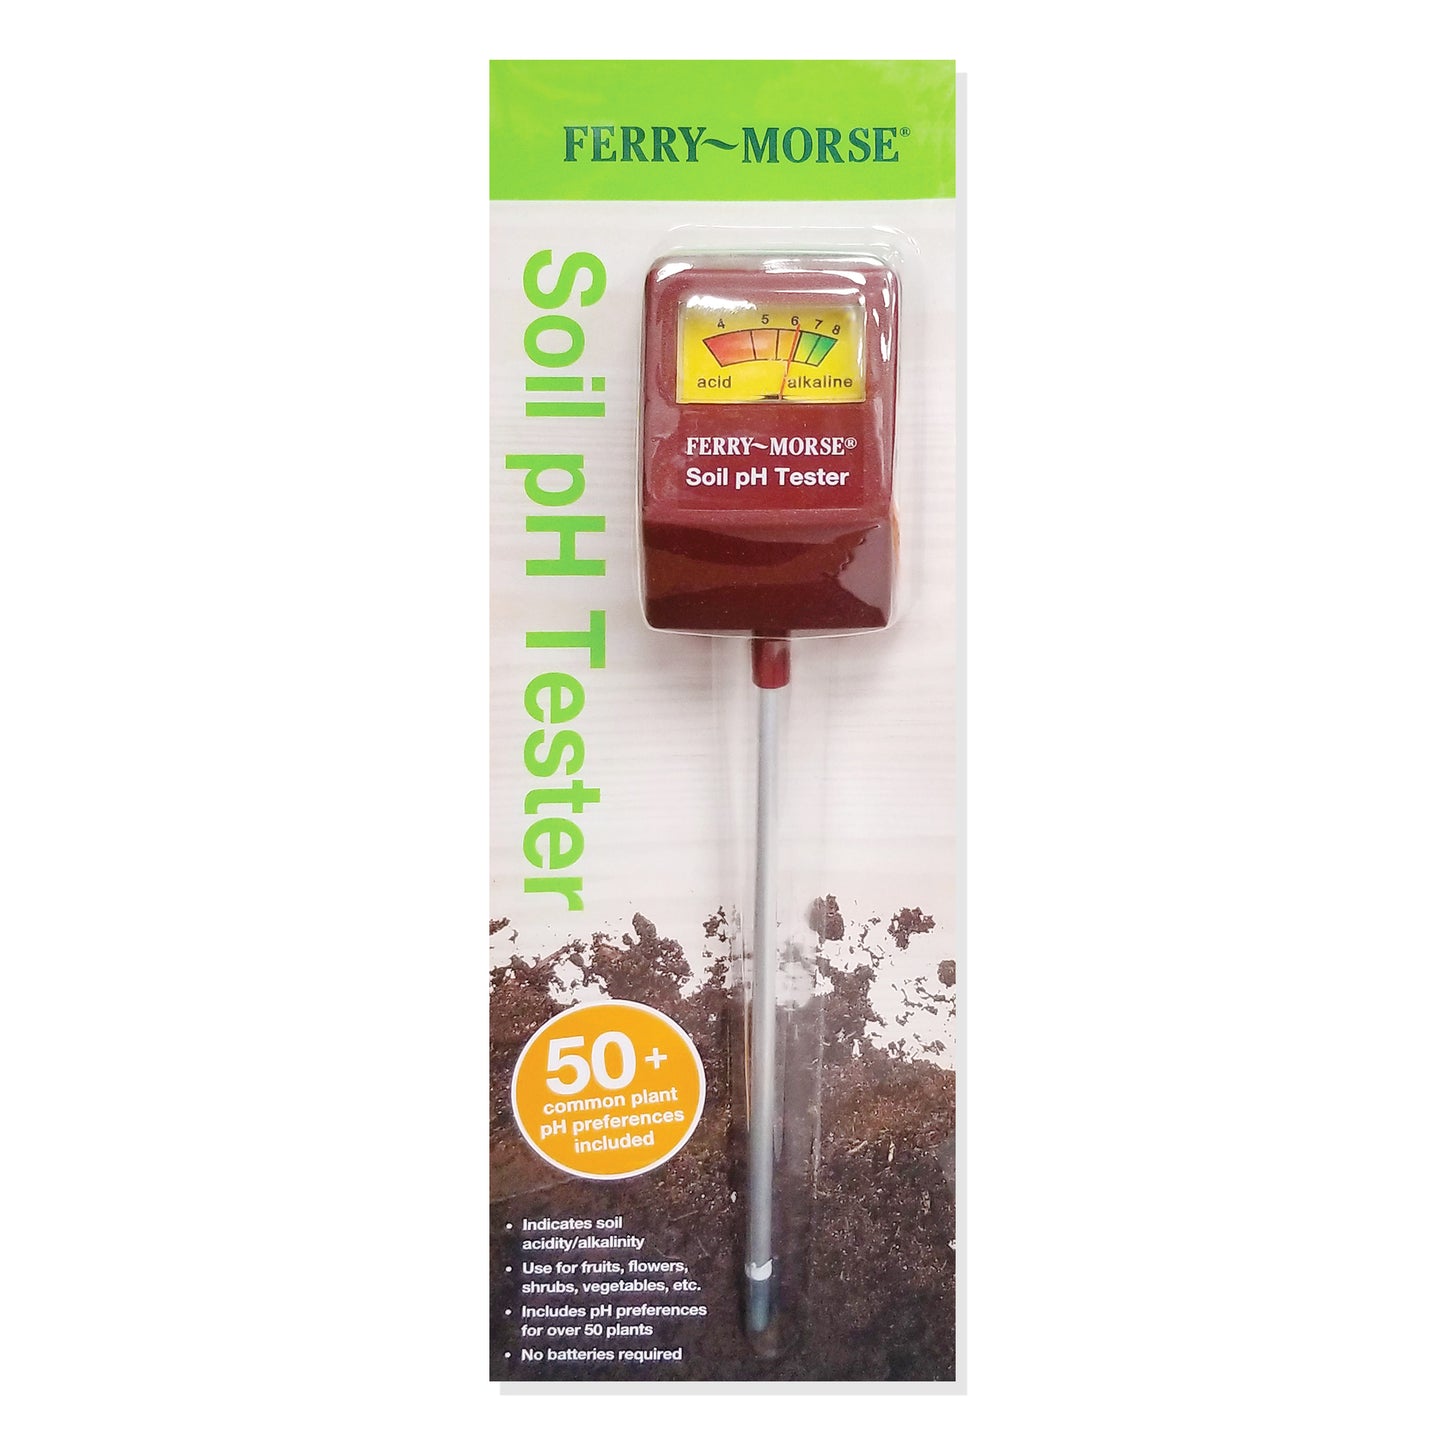 Soil pH Tester in its shelf packaging, would make a nice gift or stocking stuffer for the gardener in your life!